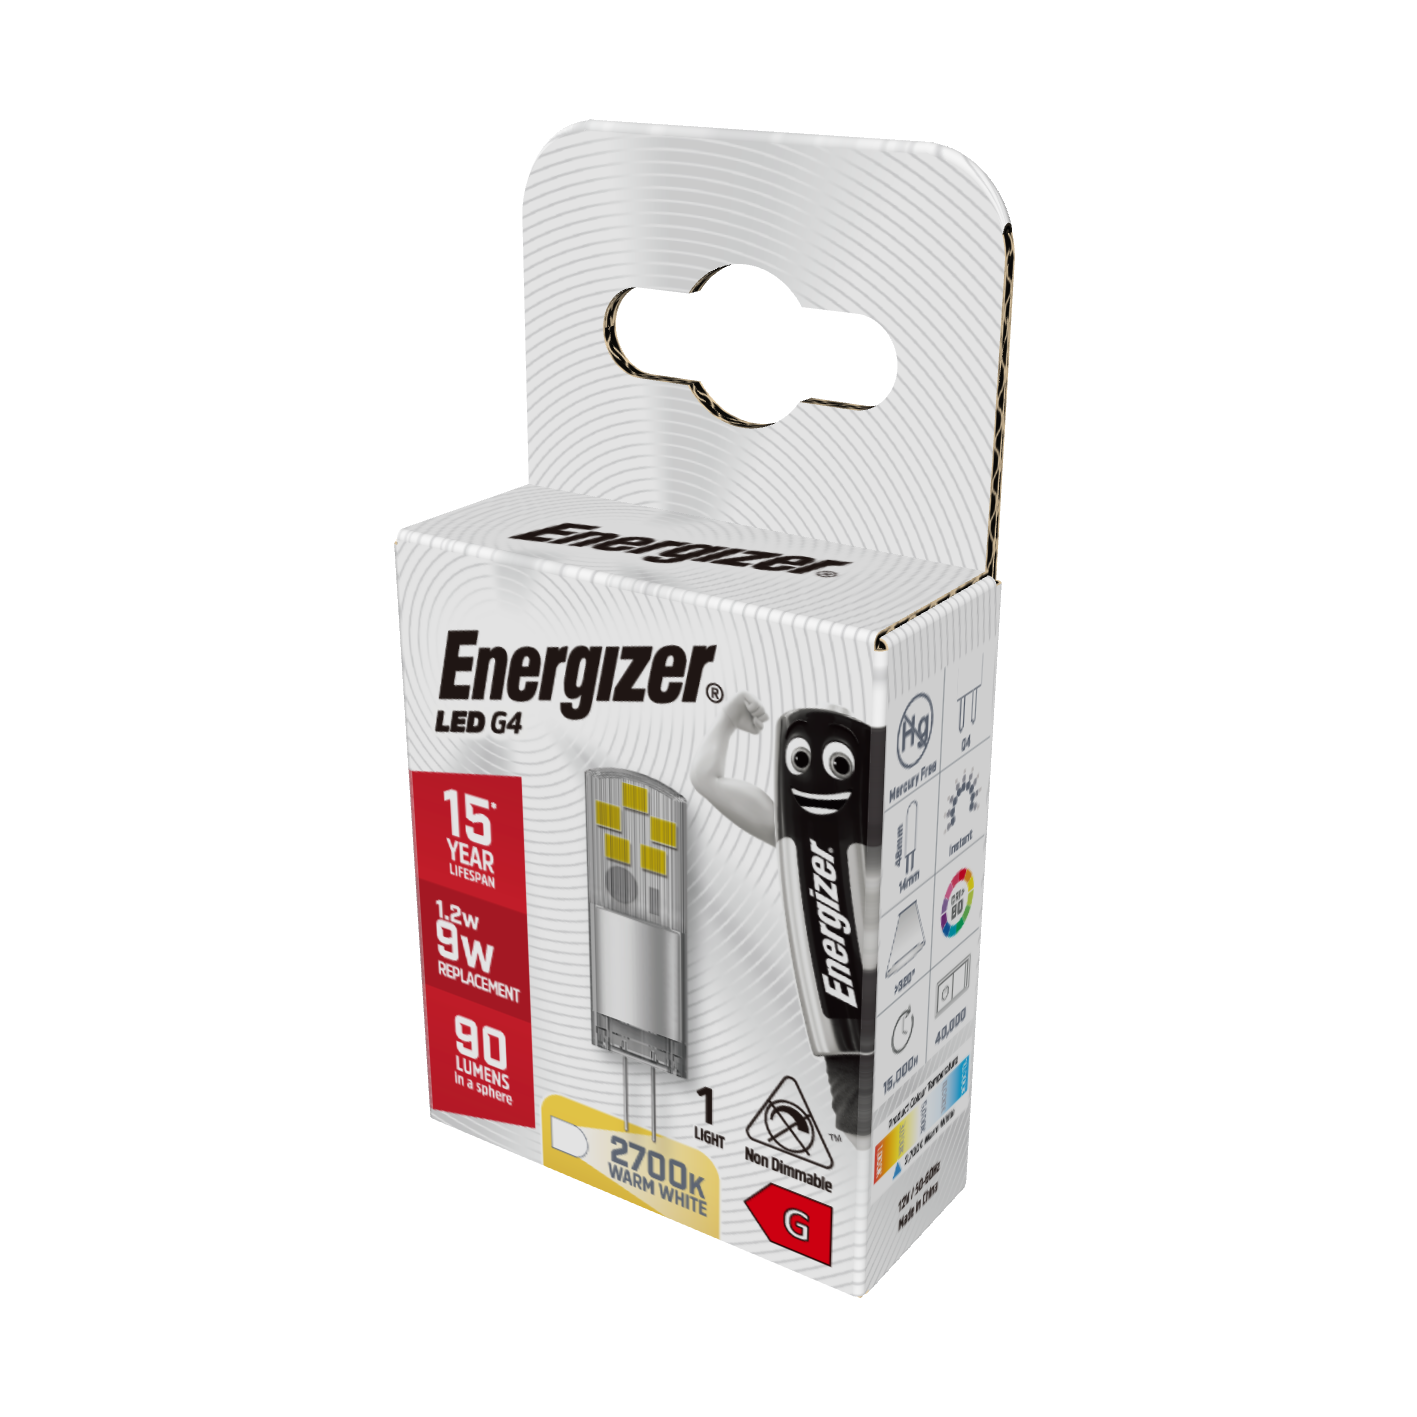 Energizer LED G4 Capsule - 1.2W, 90 Lumen, 2,700K, Non-Dimmable